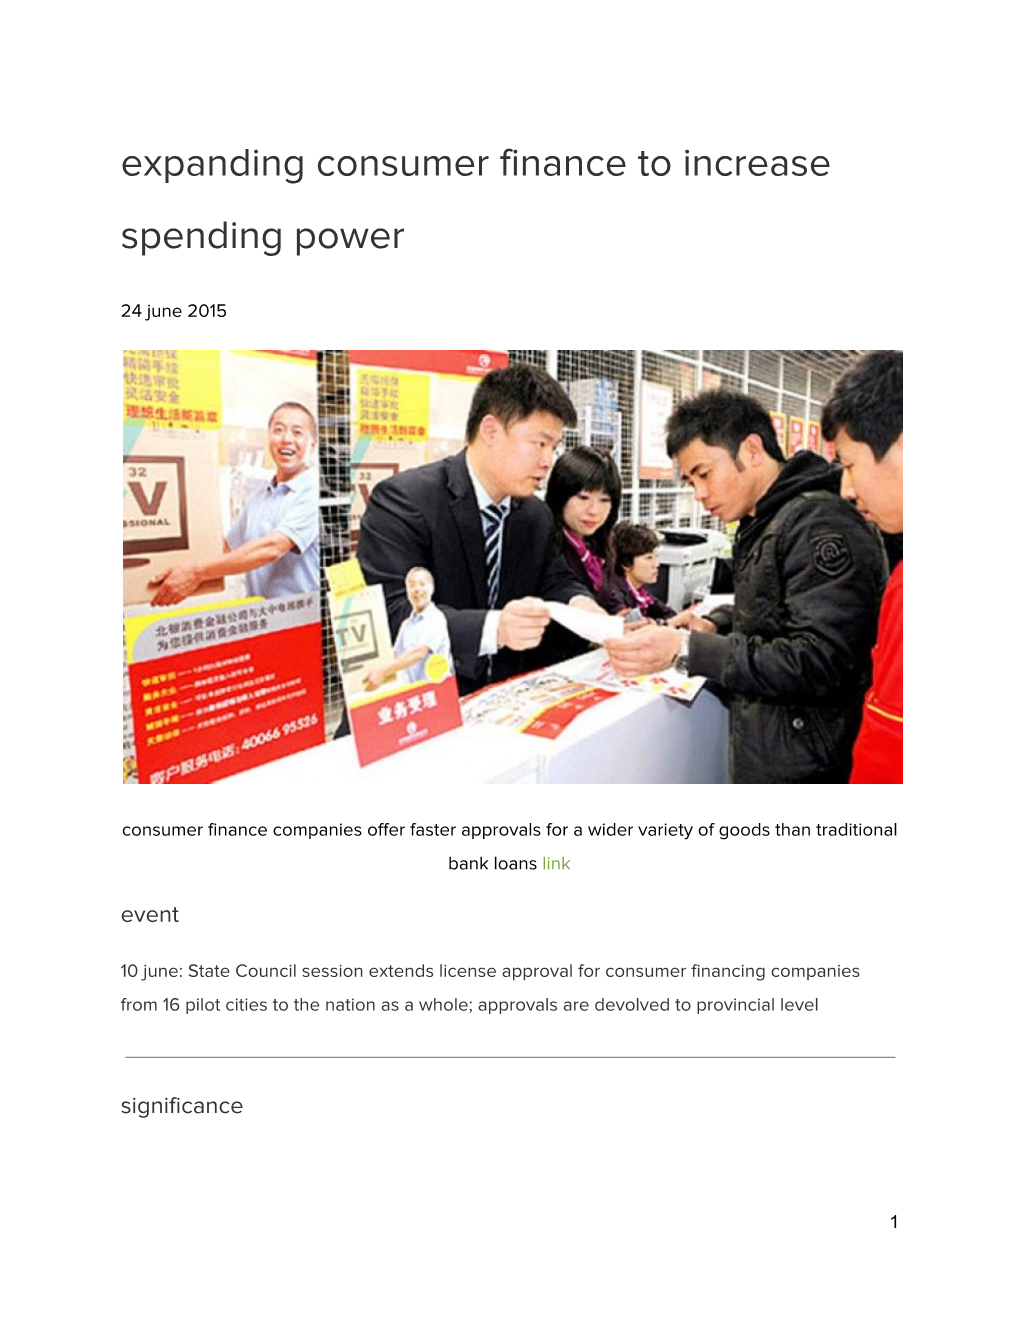 Expanding Consumer Finance to Increase Spending Power